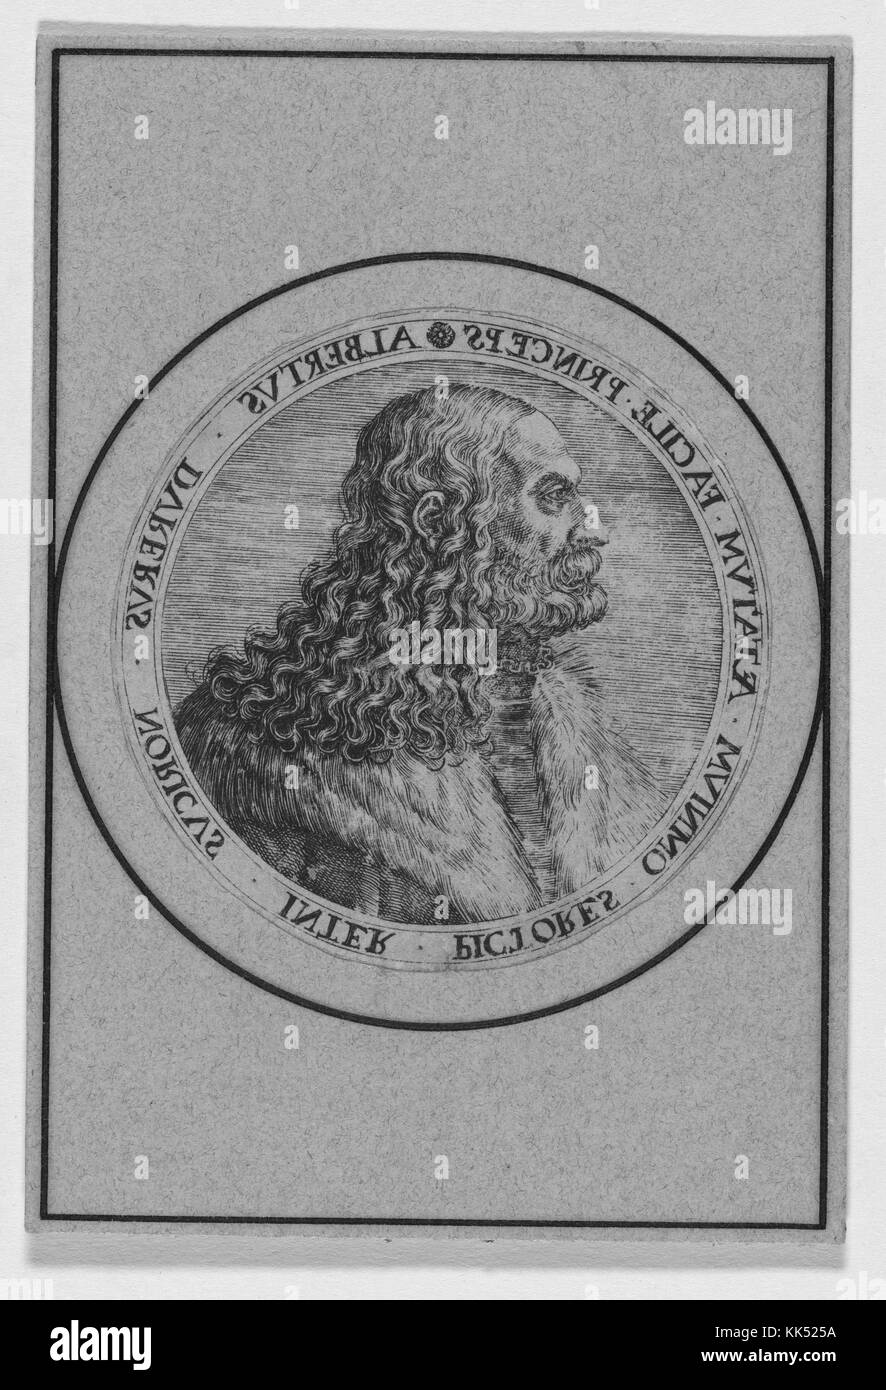 Engraved portrait of Albrecht Durer, was a painter, printmaker and theorist of the German Renaissance, 1550. From the New York Public Library. Stock Photo